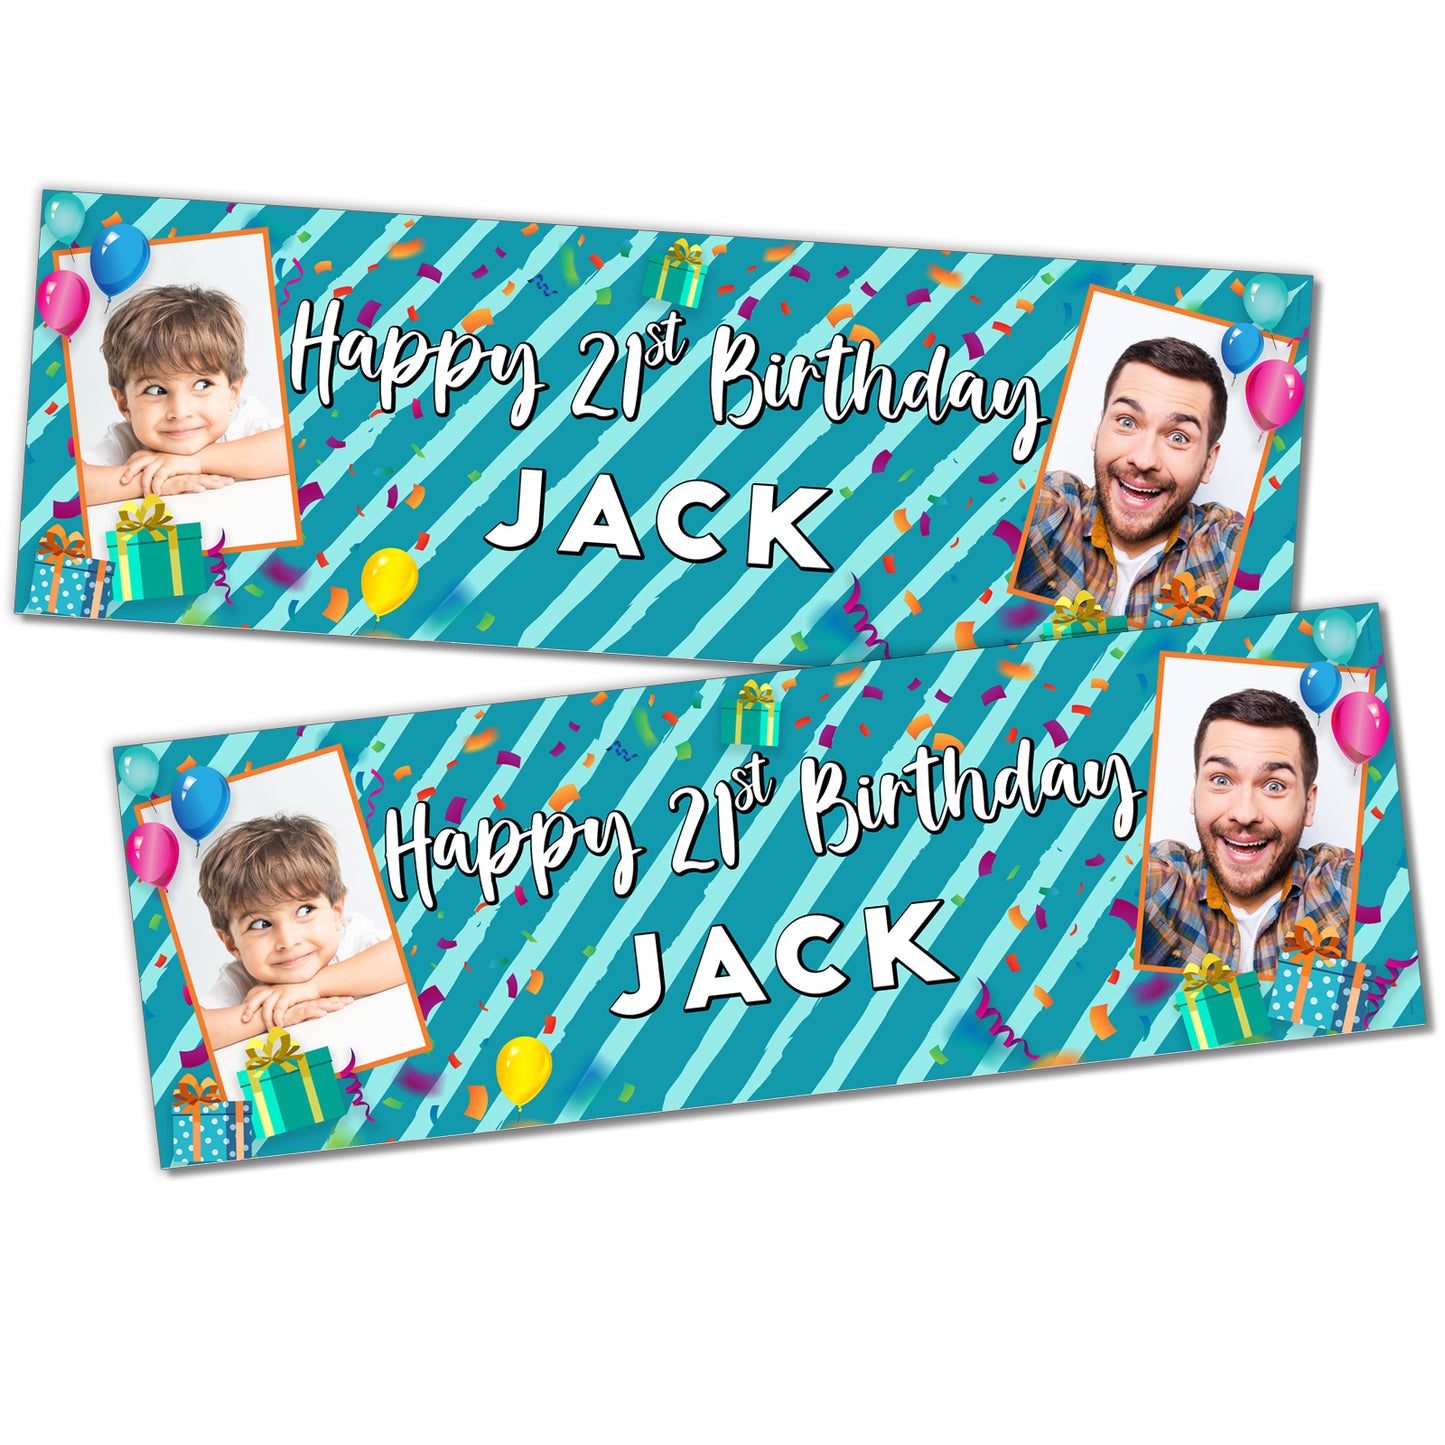 Personalised Birthday Banners in Party Teal Stripes Design